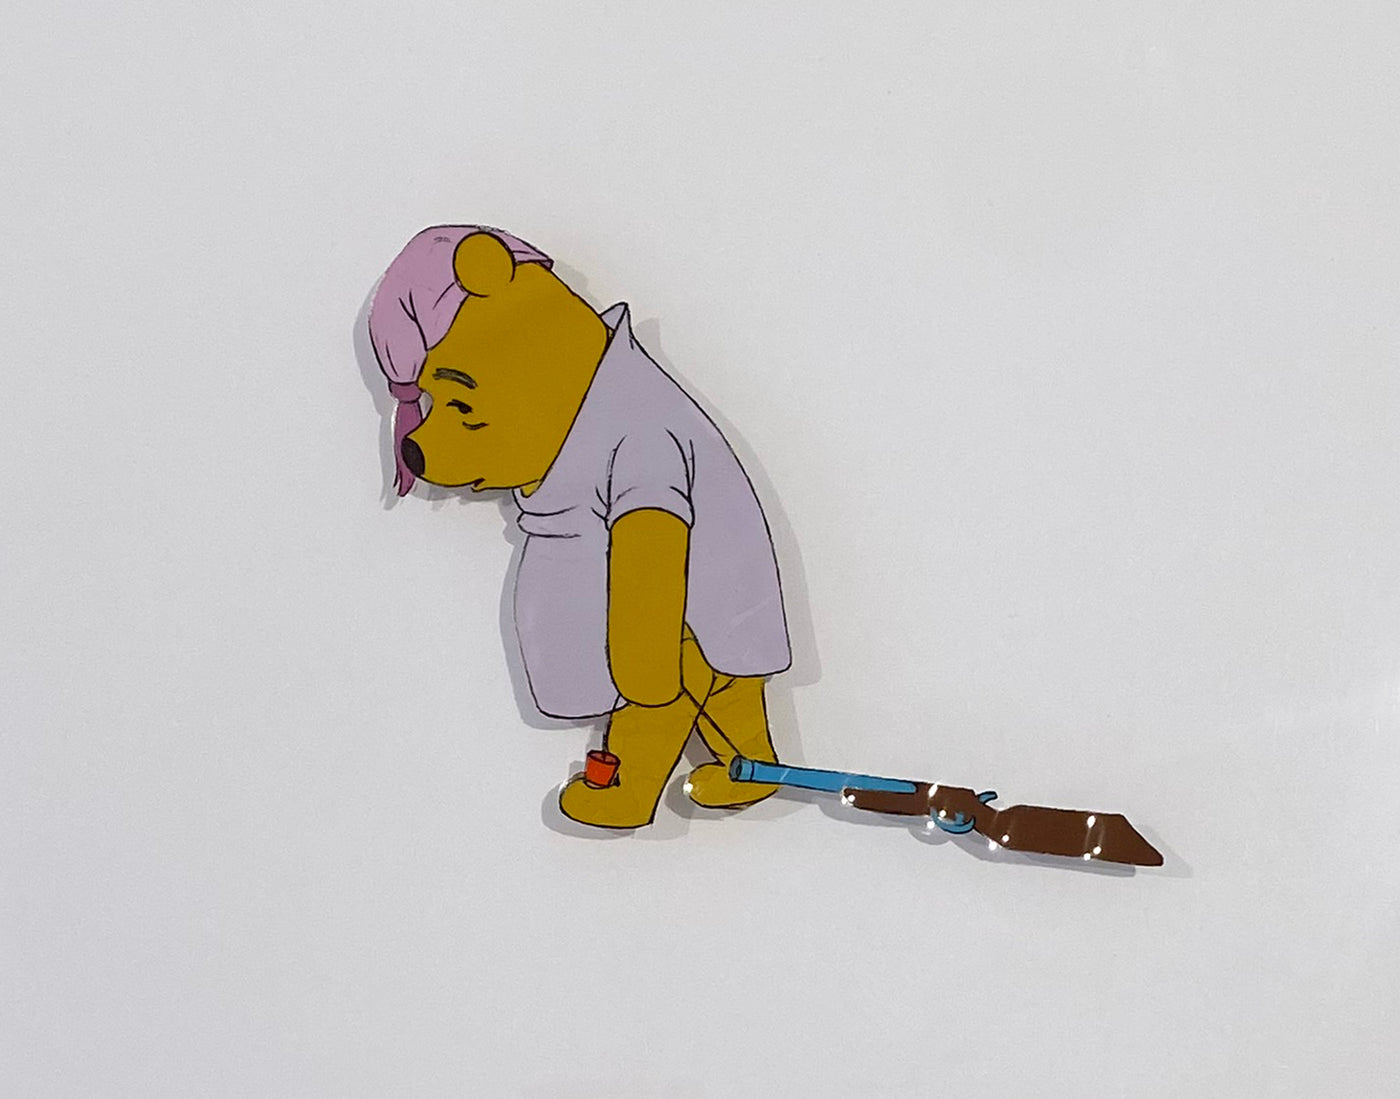 Original Walt Disney Production Cel from The Many Adventures of Winnie the Pooh featuring Winnie the Pooh